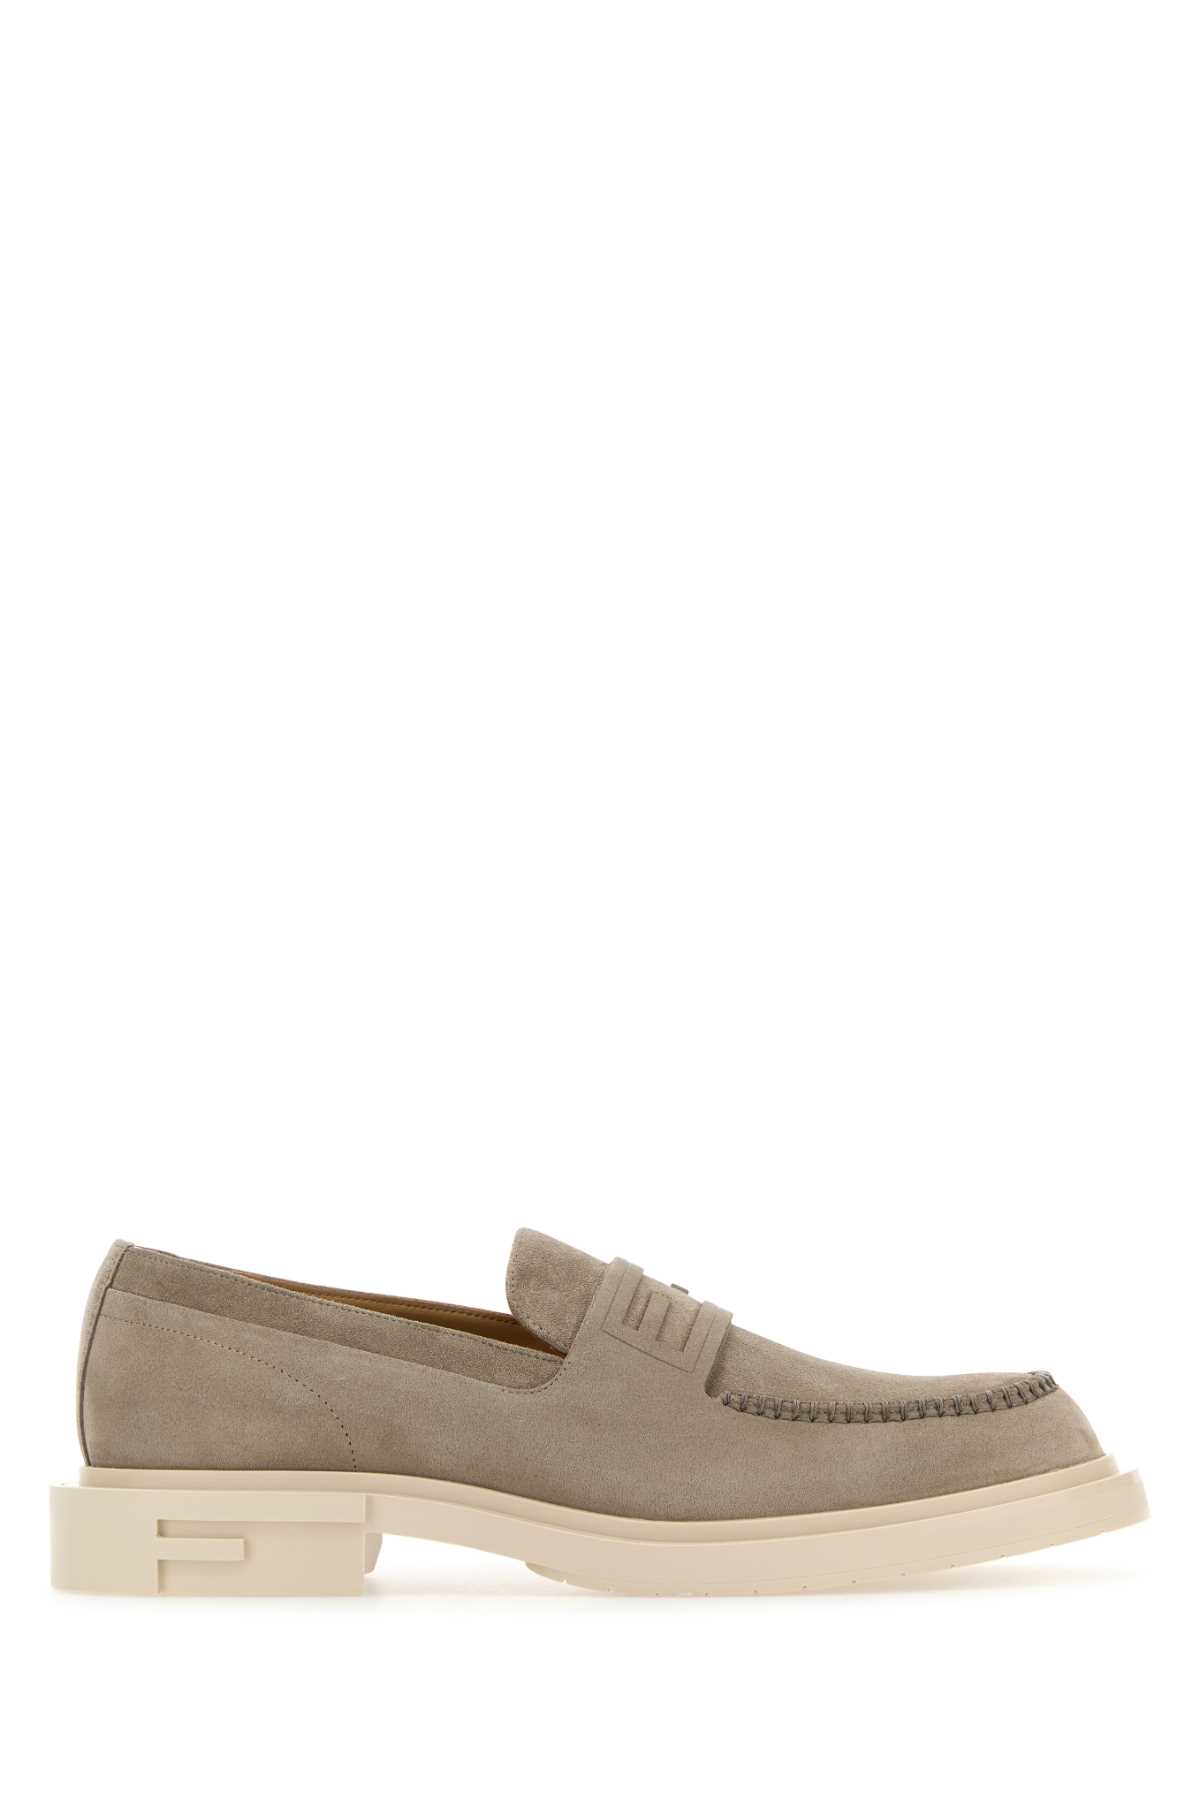 Dove Grey Suede Frame Loafers